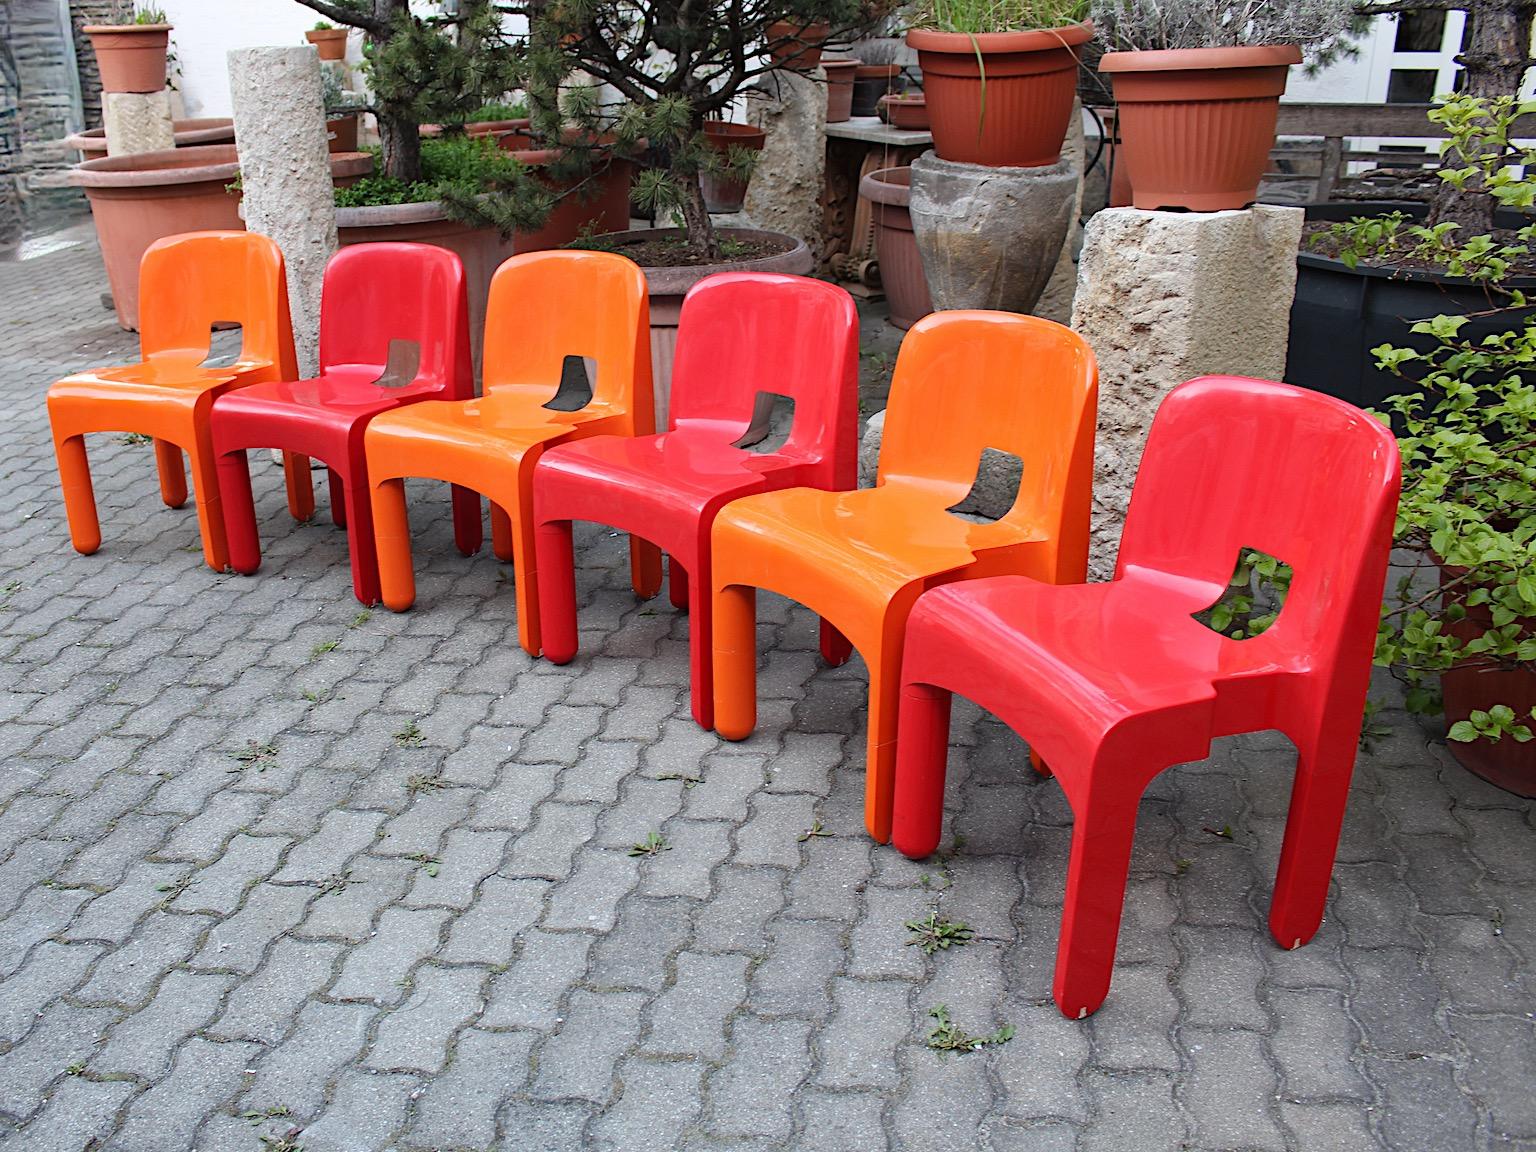 Space Age red and orange six plastic pop art vintage chairs or dining chairs model Universale designed by Joe Colombo 
1965 - 1967 and executed by Kartell, Milano.
These happy making colors like cherry red and bold orange highlights this set of six